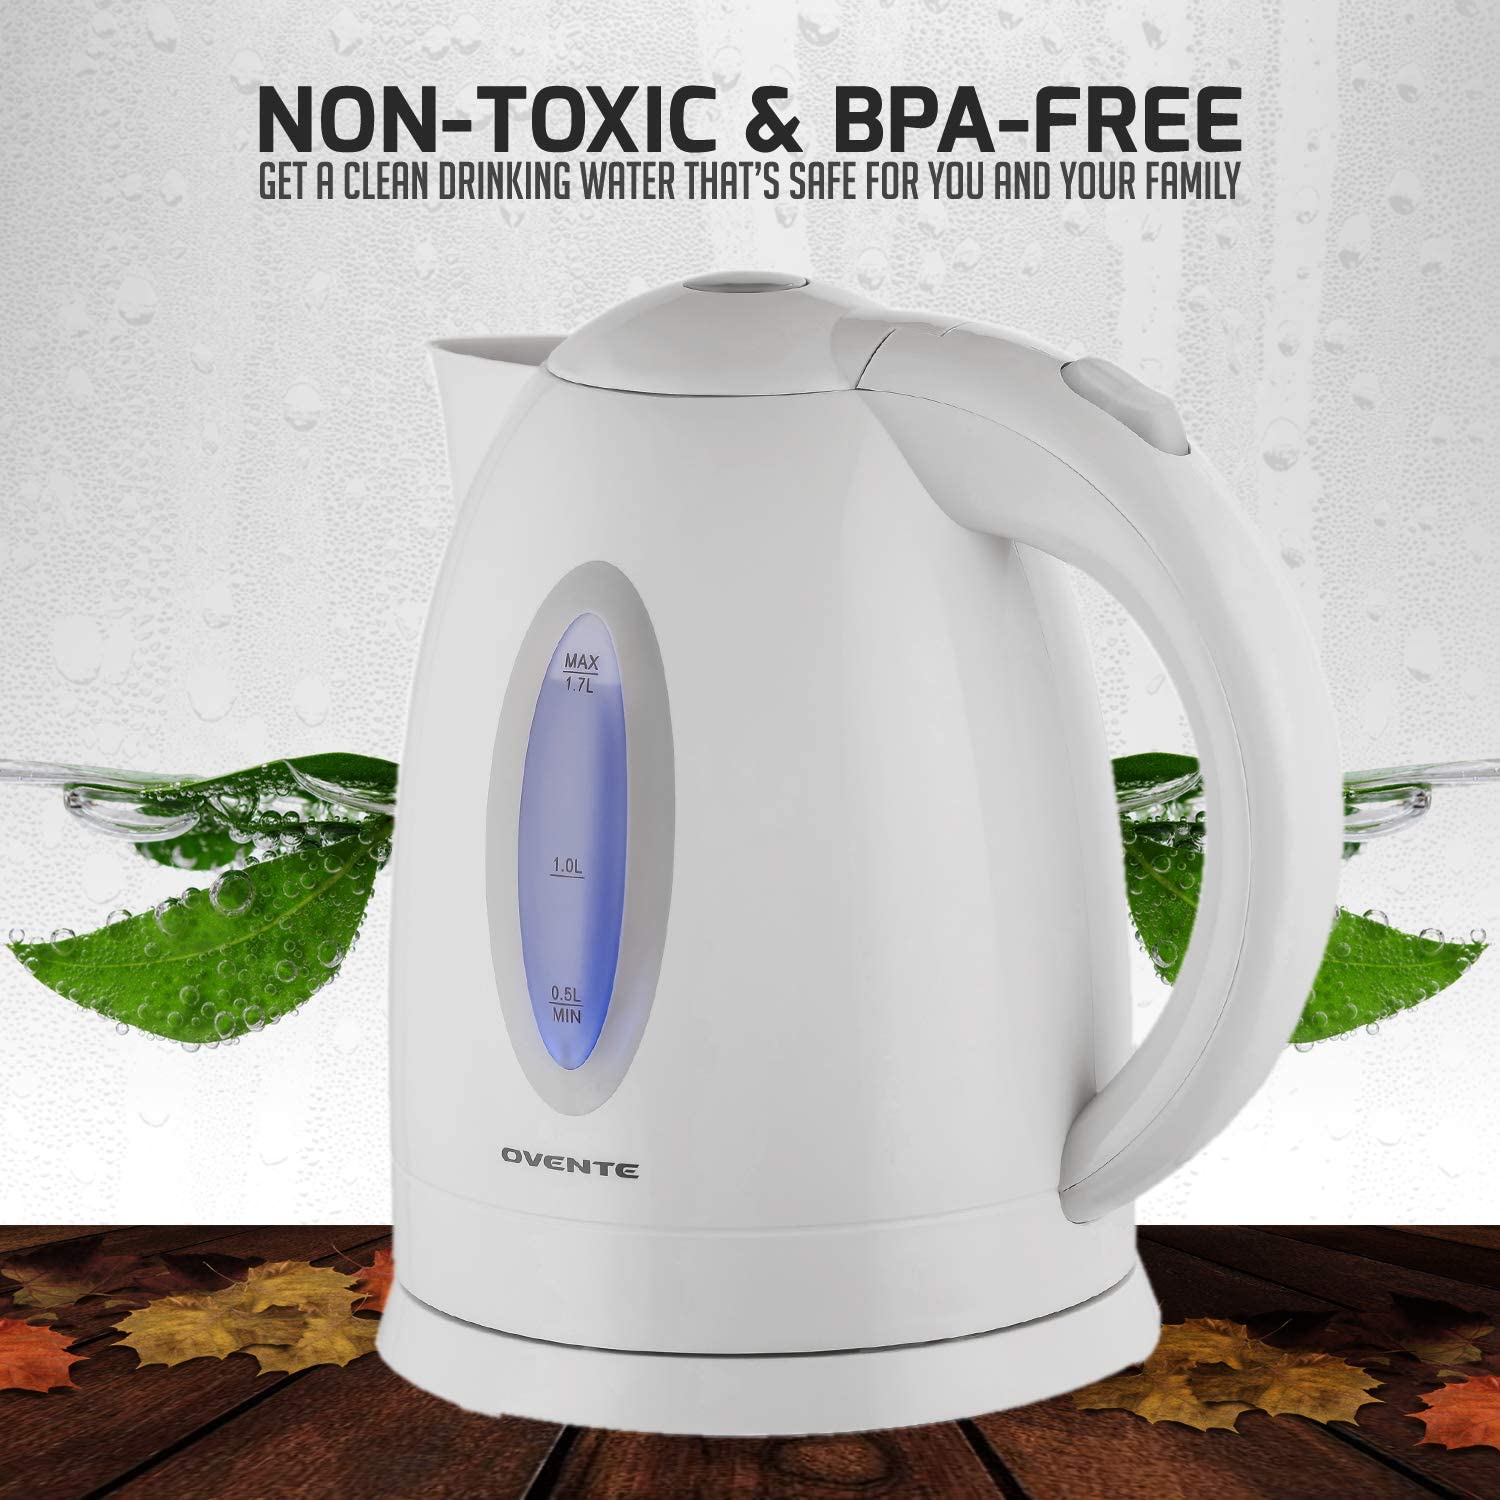 Non Toxic Tea Kettles: Which Kettles Are Non Toxic?